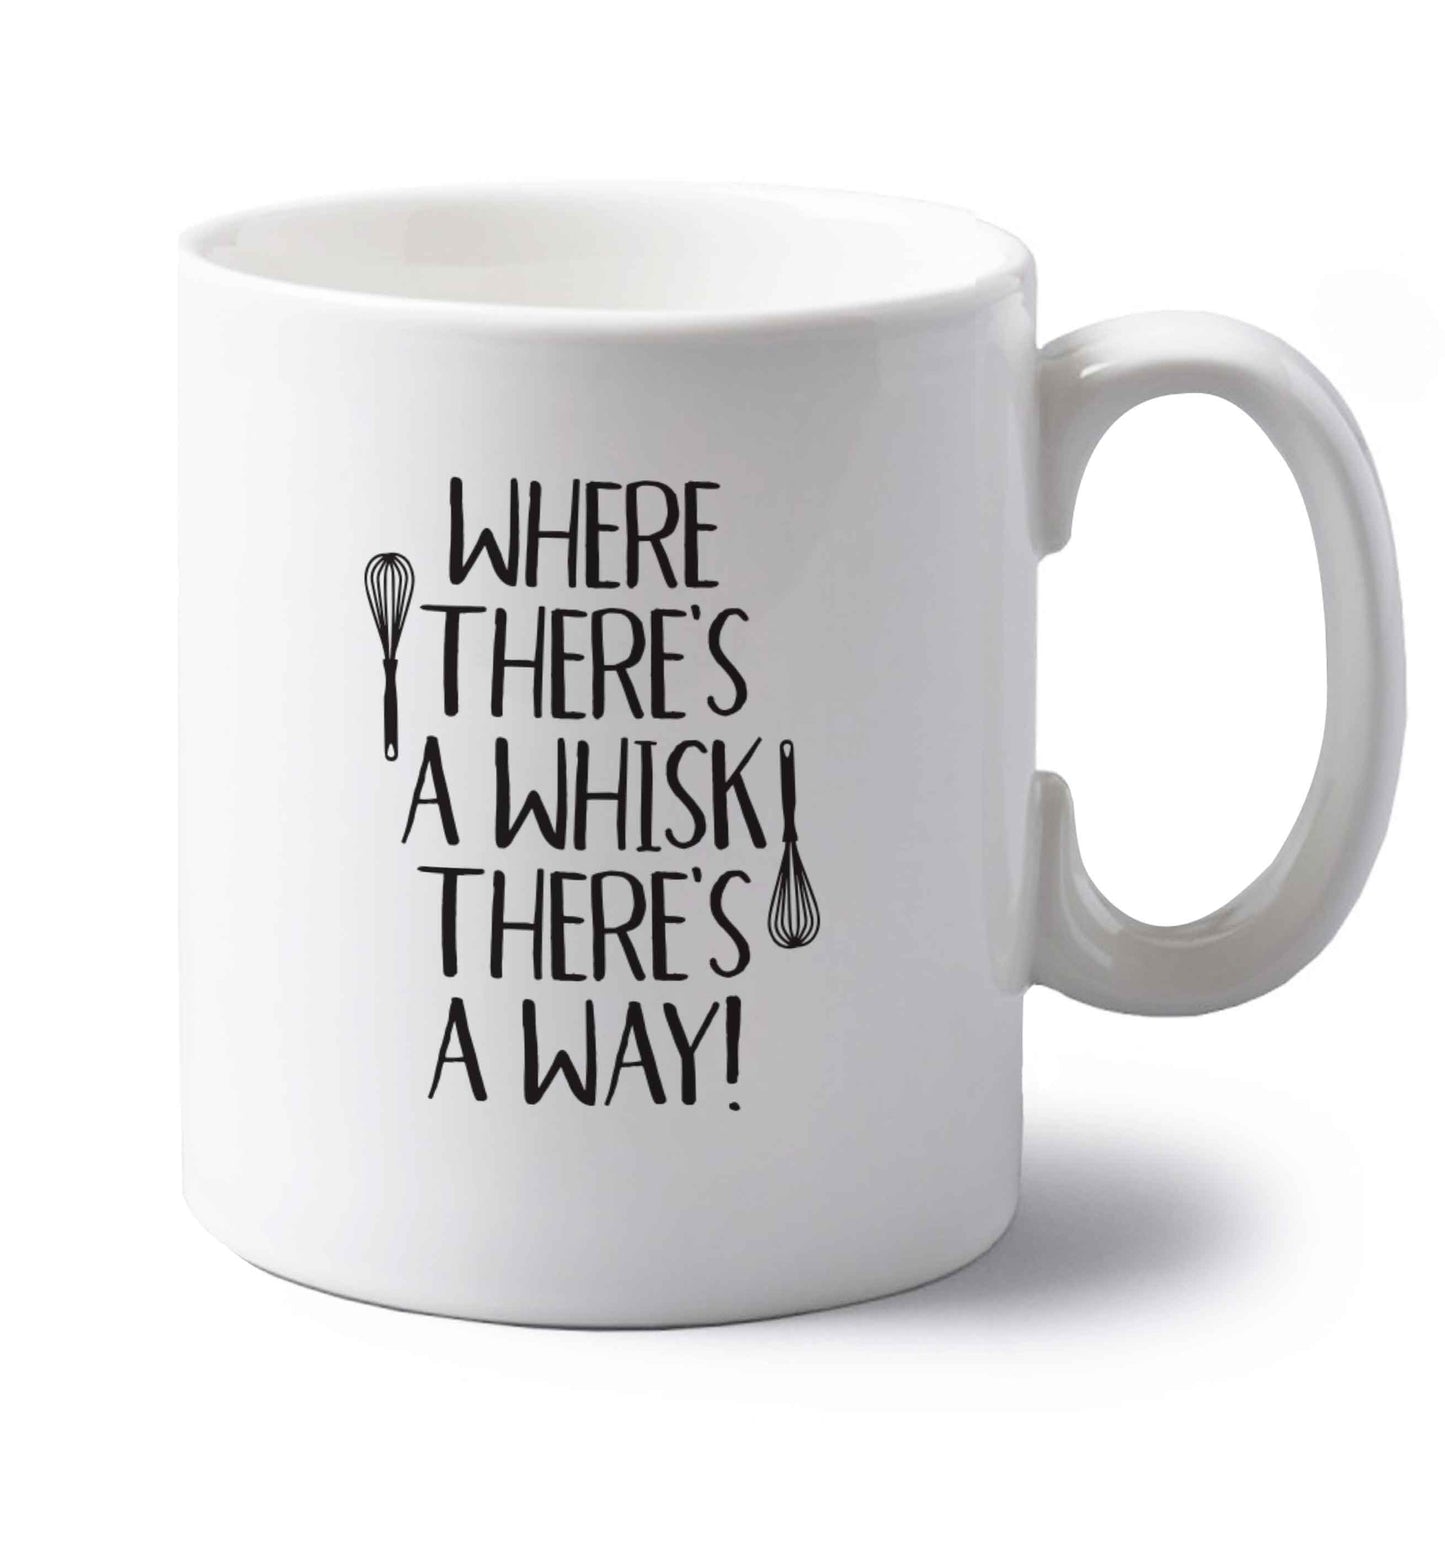 Where there's a whisk there's a way left handed white ceramic mug 